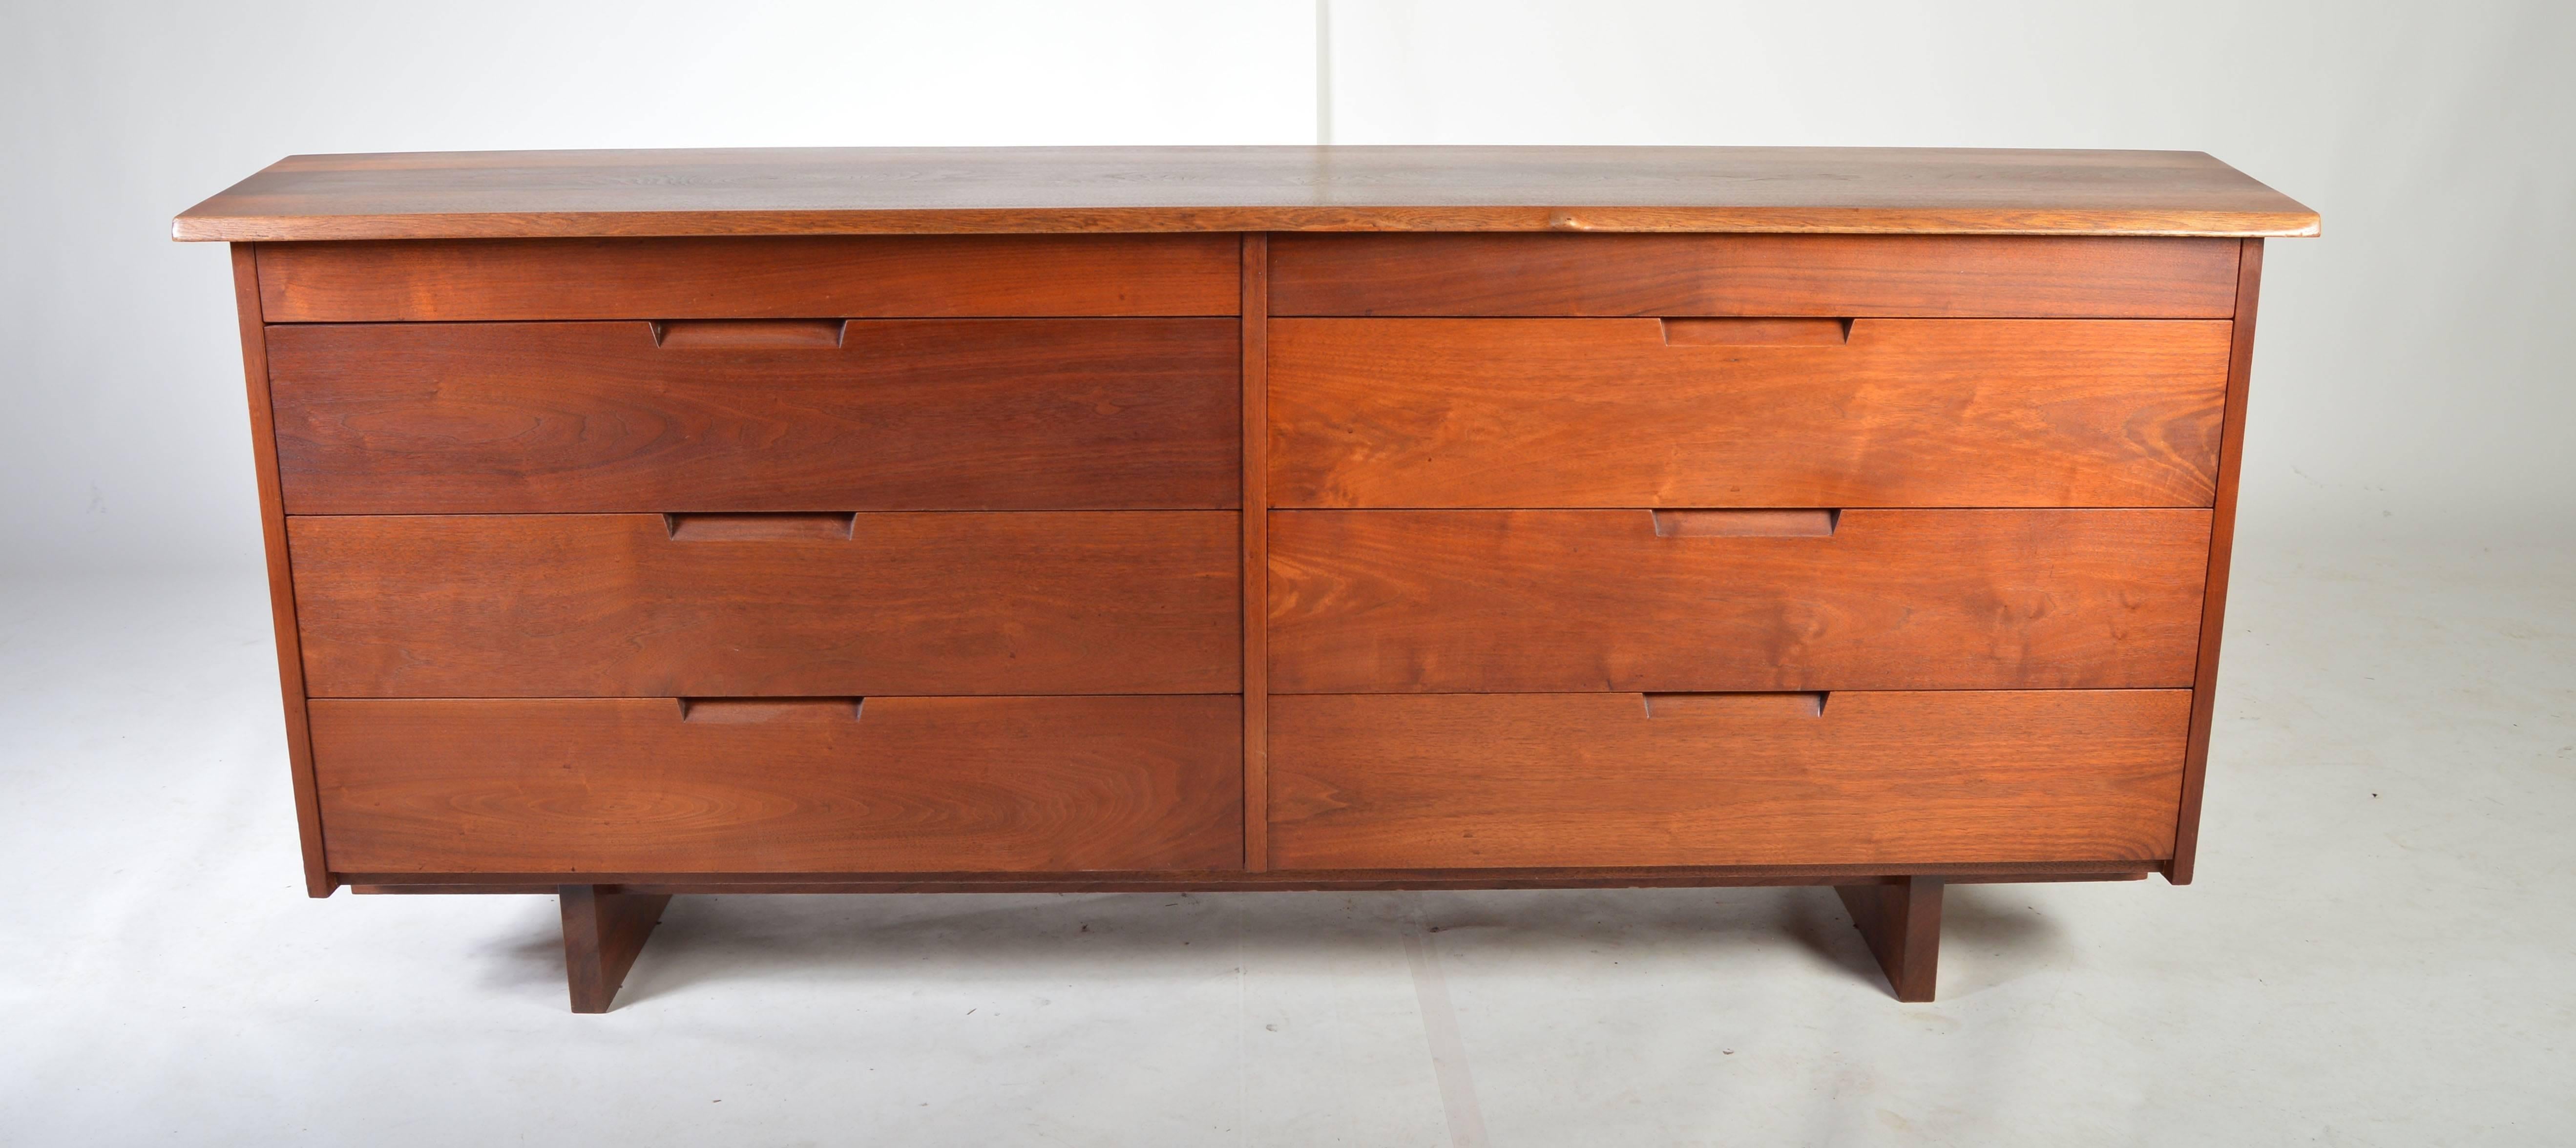 A beautiful original, custom eight drawer chest by George Nakashima in solid walnut having a unique free-form branch knot along the front edge. Built in 1957. Copy of the original purchase receipt included.